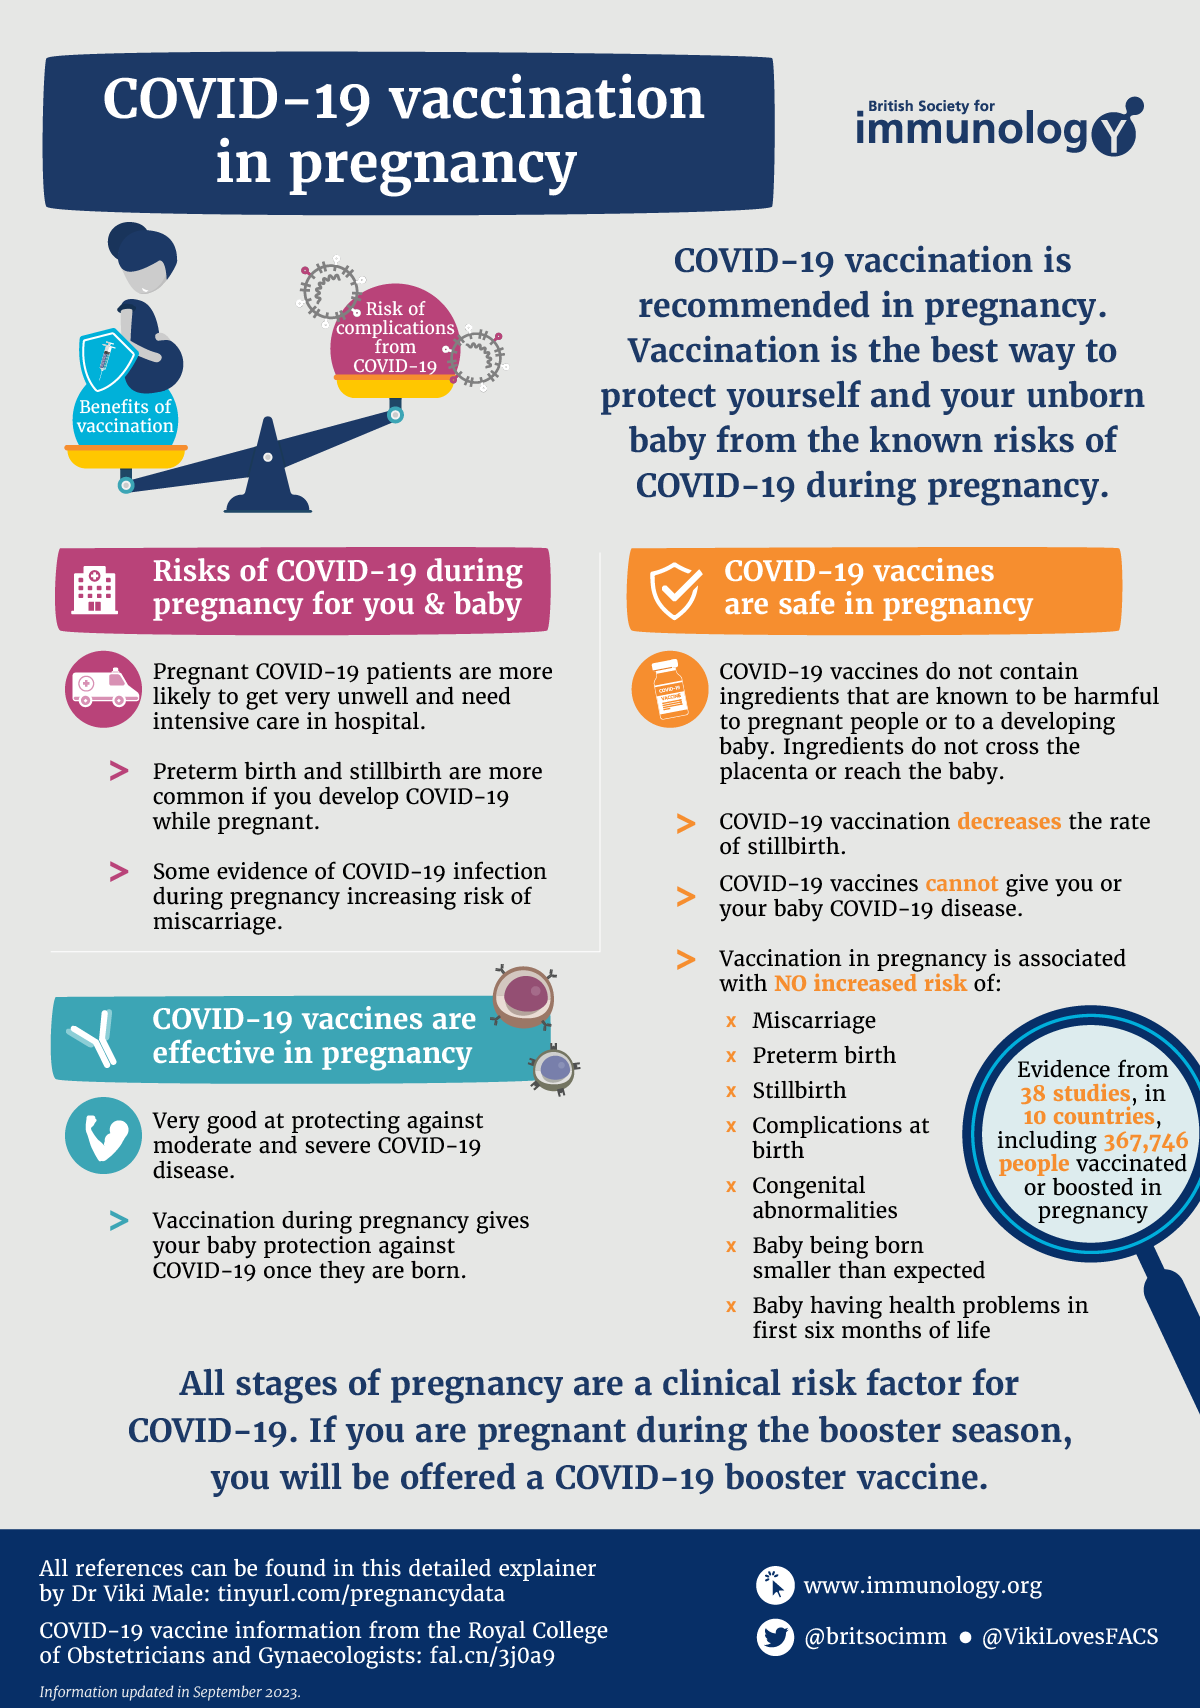 BSI infographic about the COVID-19 vaccine in pregnancy